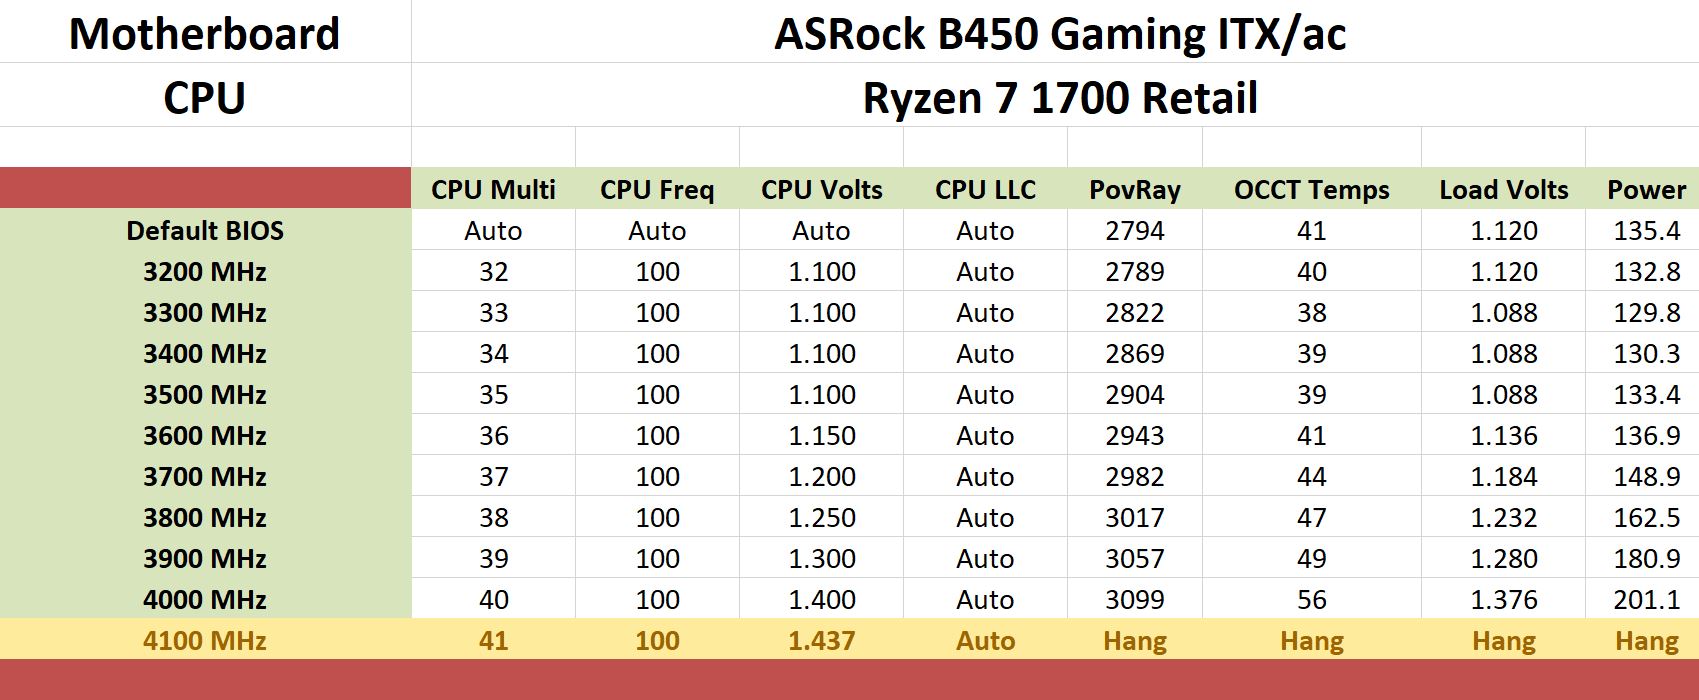 Overclocking With a Ryzen 7 1700 - The ASRock B450 Gaming ITX/ac